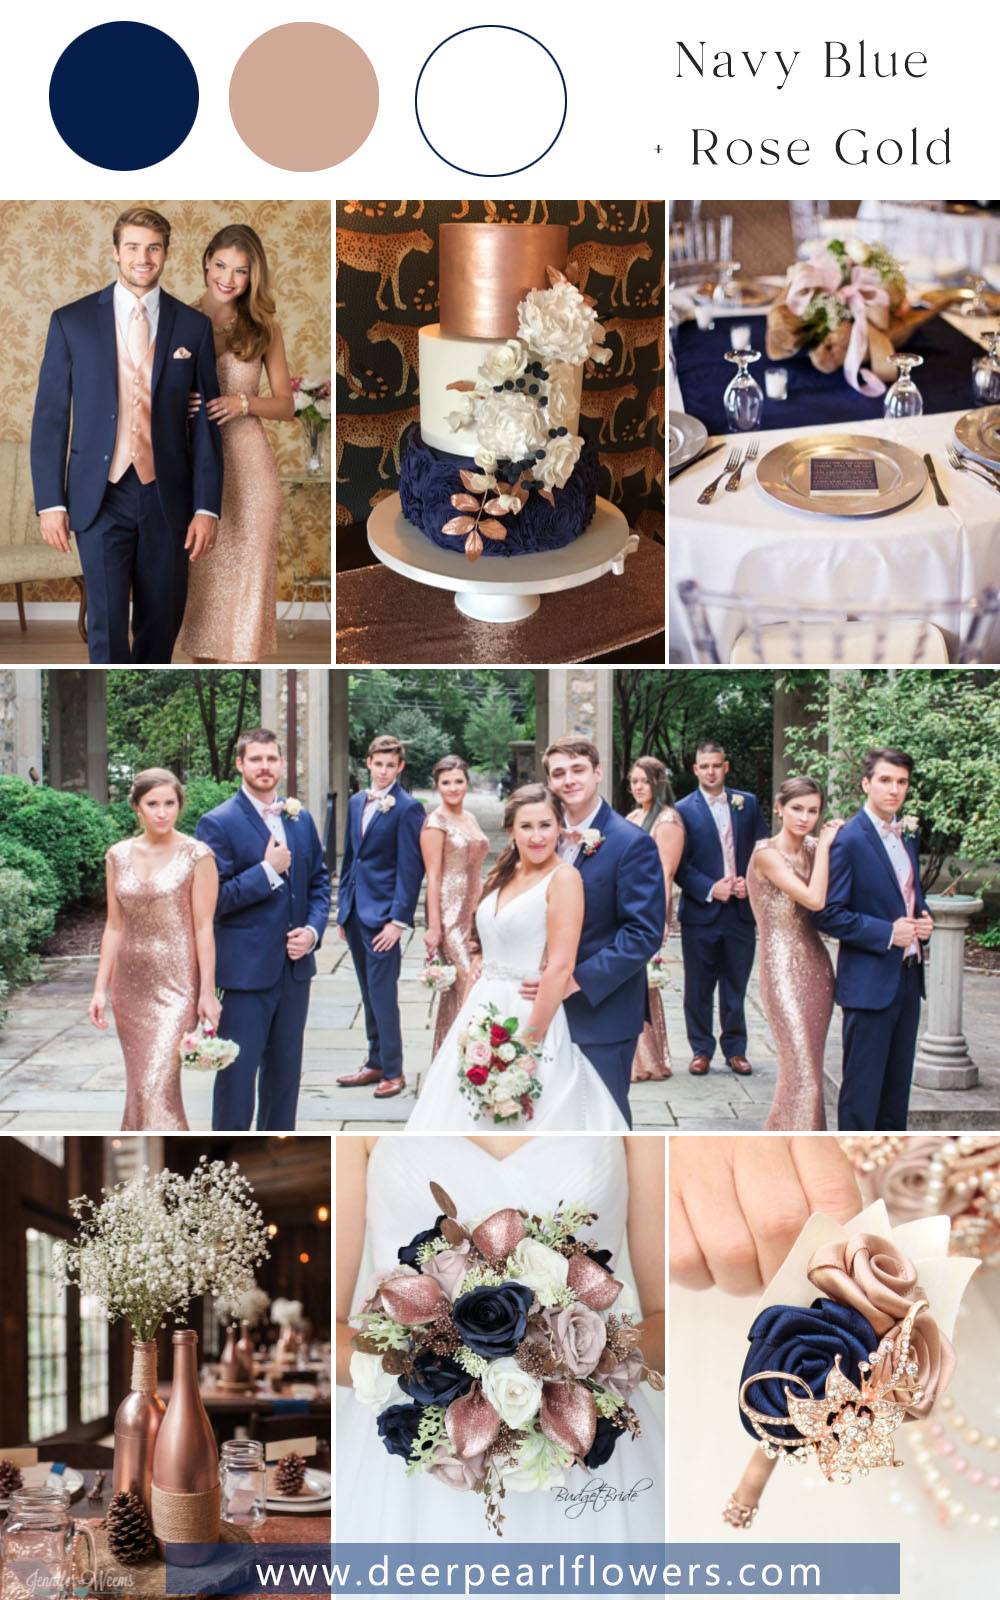 rose gold and navy blue wedding color ideas